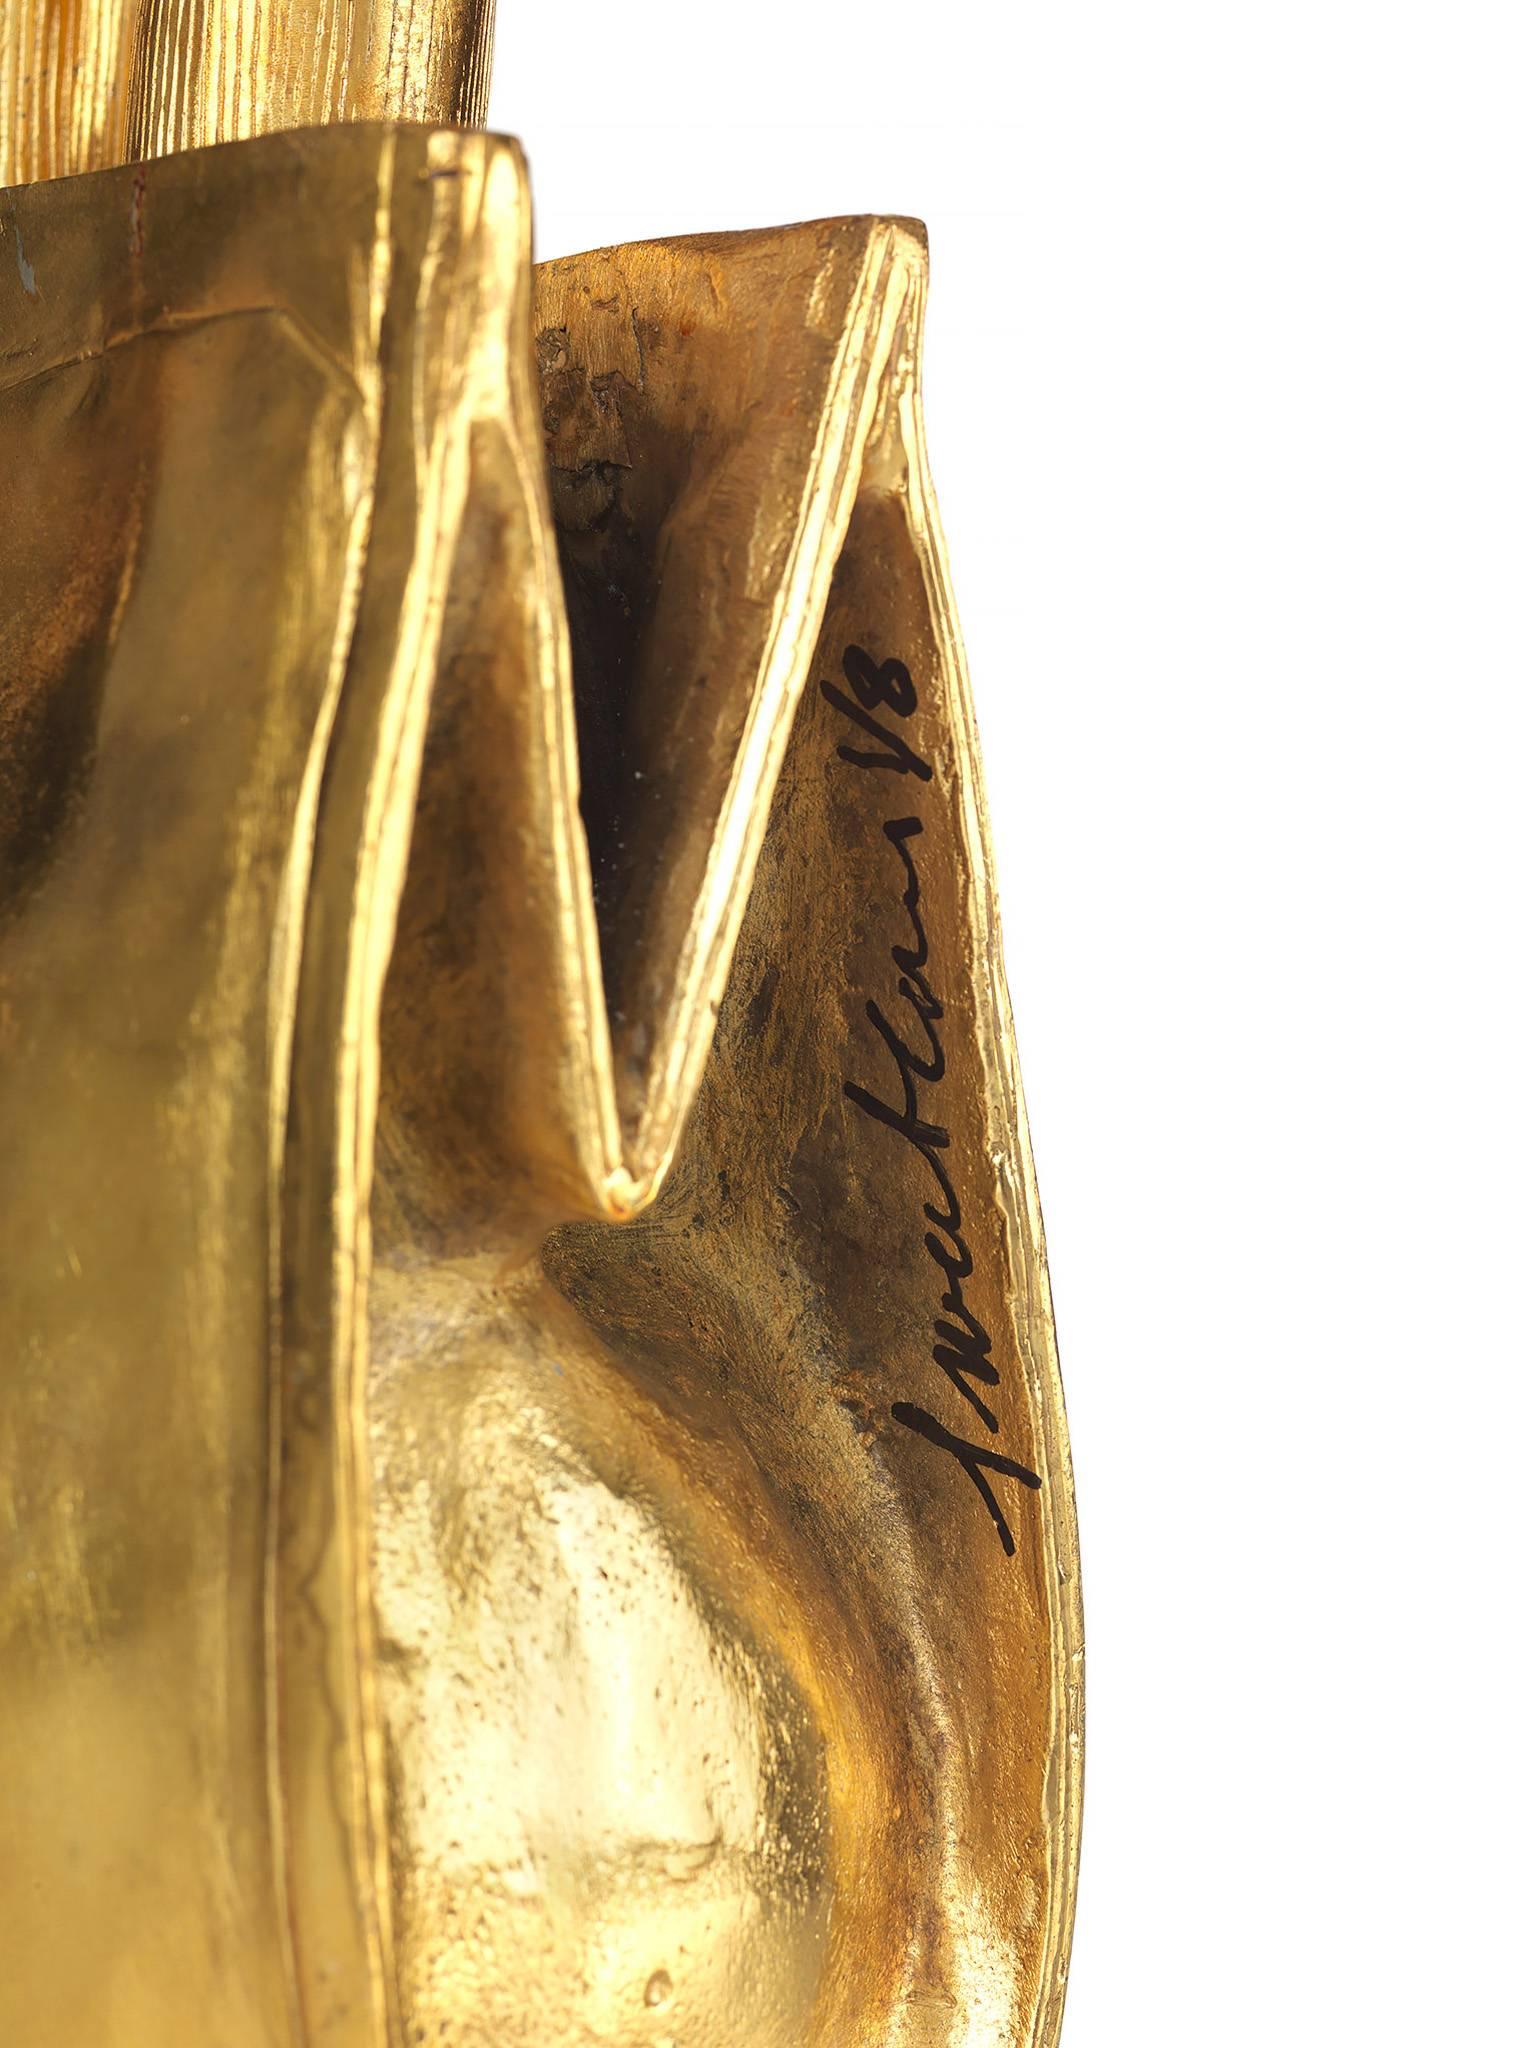 Original sculpture signed/numbered 1/8 ex.
Gold plated bronze. 
Acquired directly from the artist.
Free shipment worldwide.

William Sweetlove, born in Ostend, Belgium, in 1949, unites dadaism with surrealism and pop art in humoristic sculptures